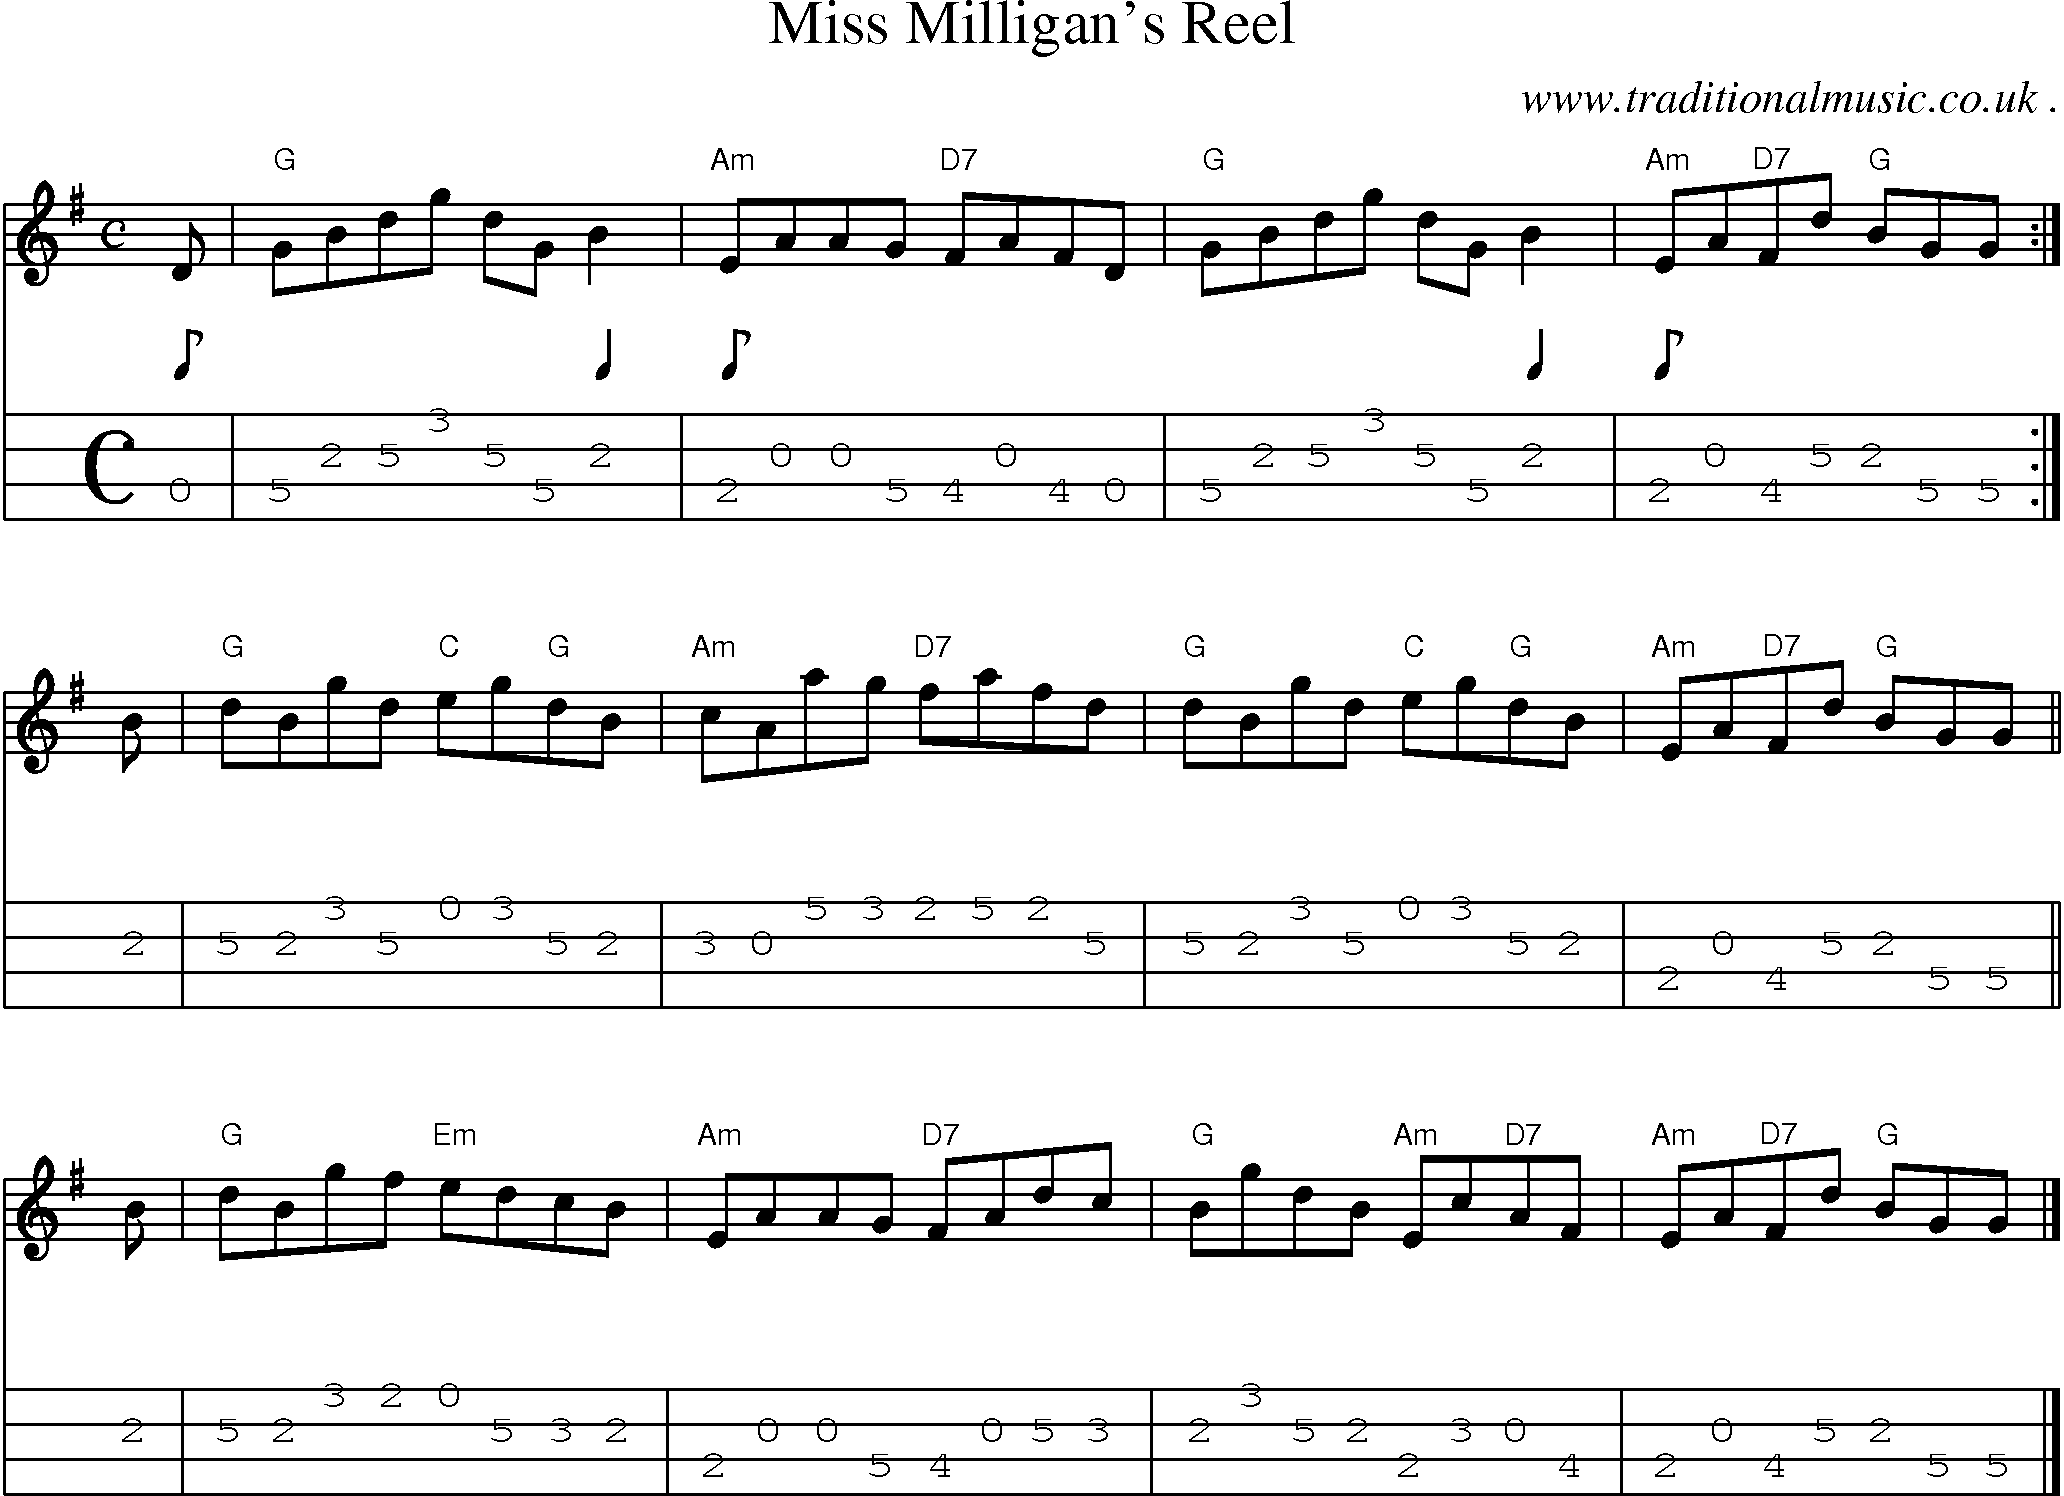 Sheet-music  score, Chords and Mandolin Tabs for Miss Milligans Reel